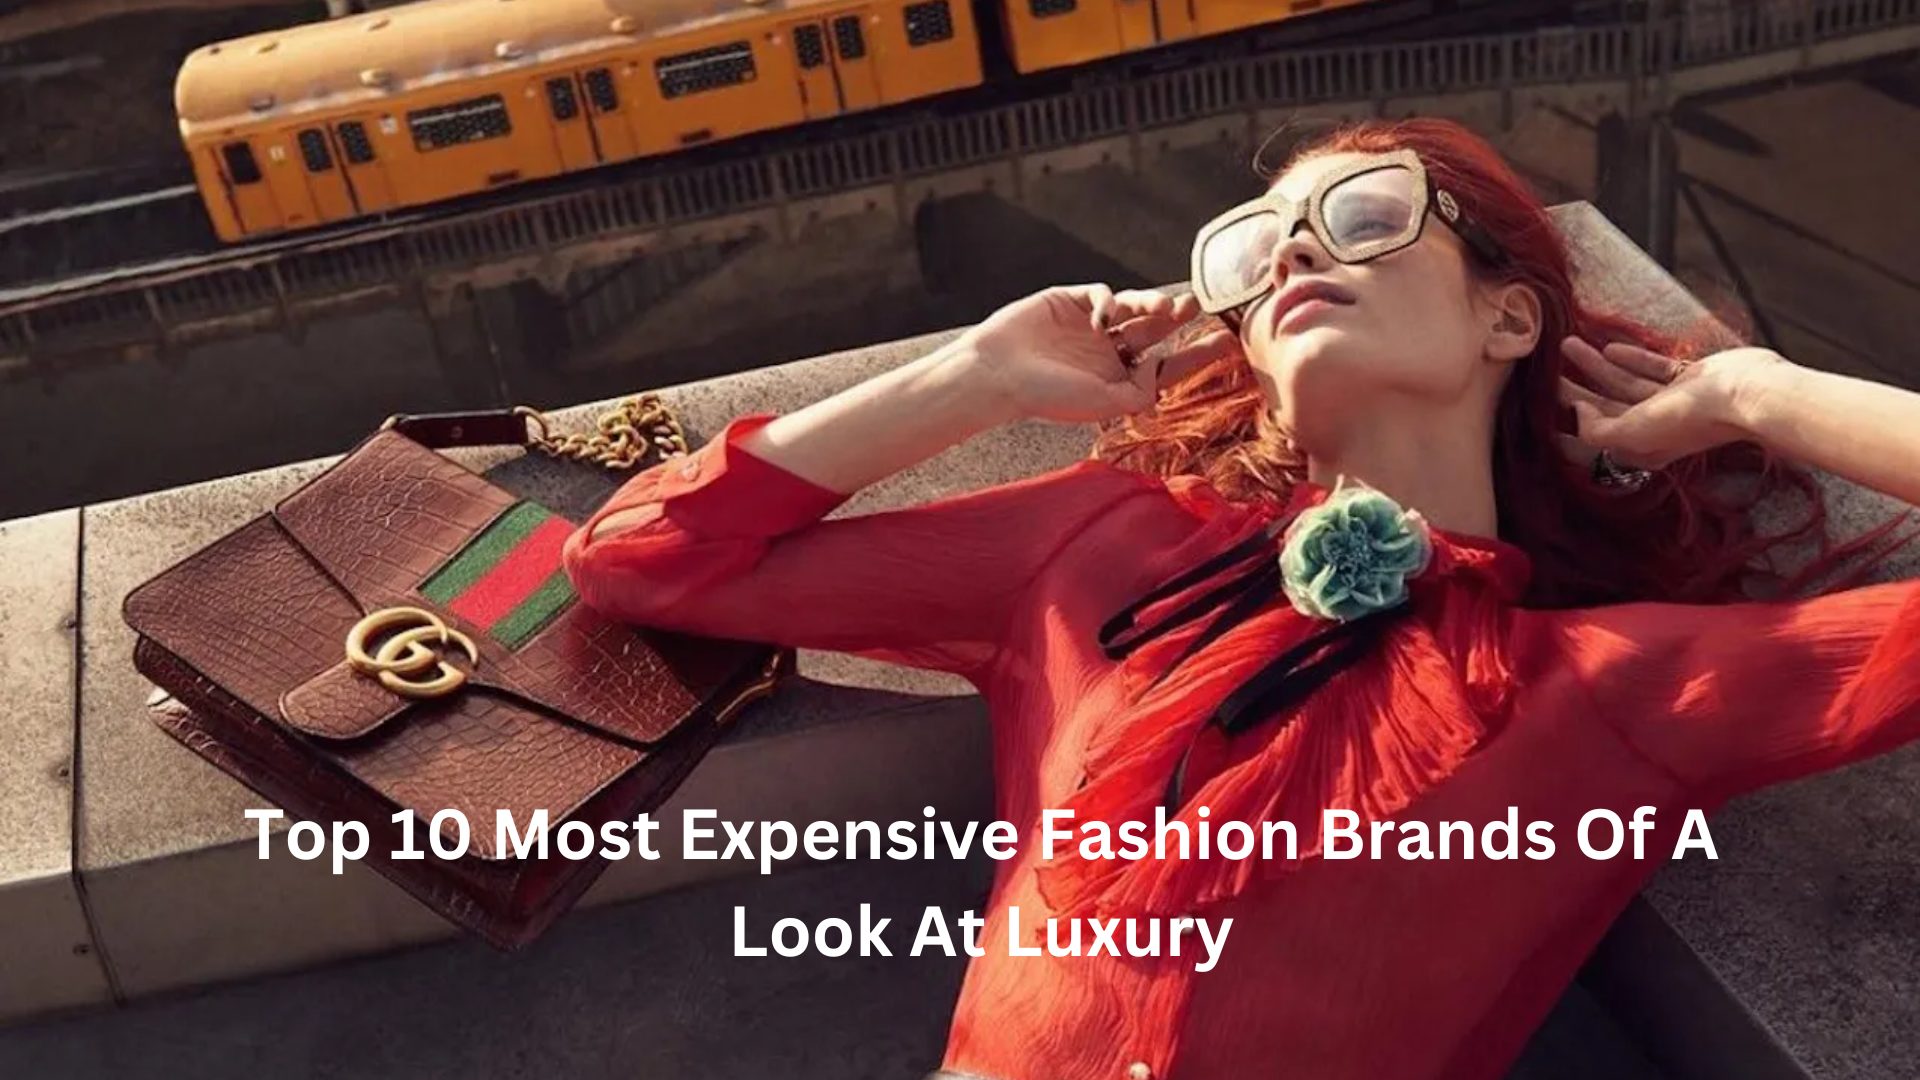 Top 10 Most Expensive Fashion Brands Of A Look At Luxury